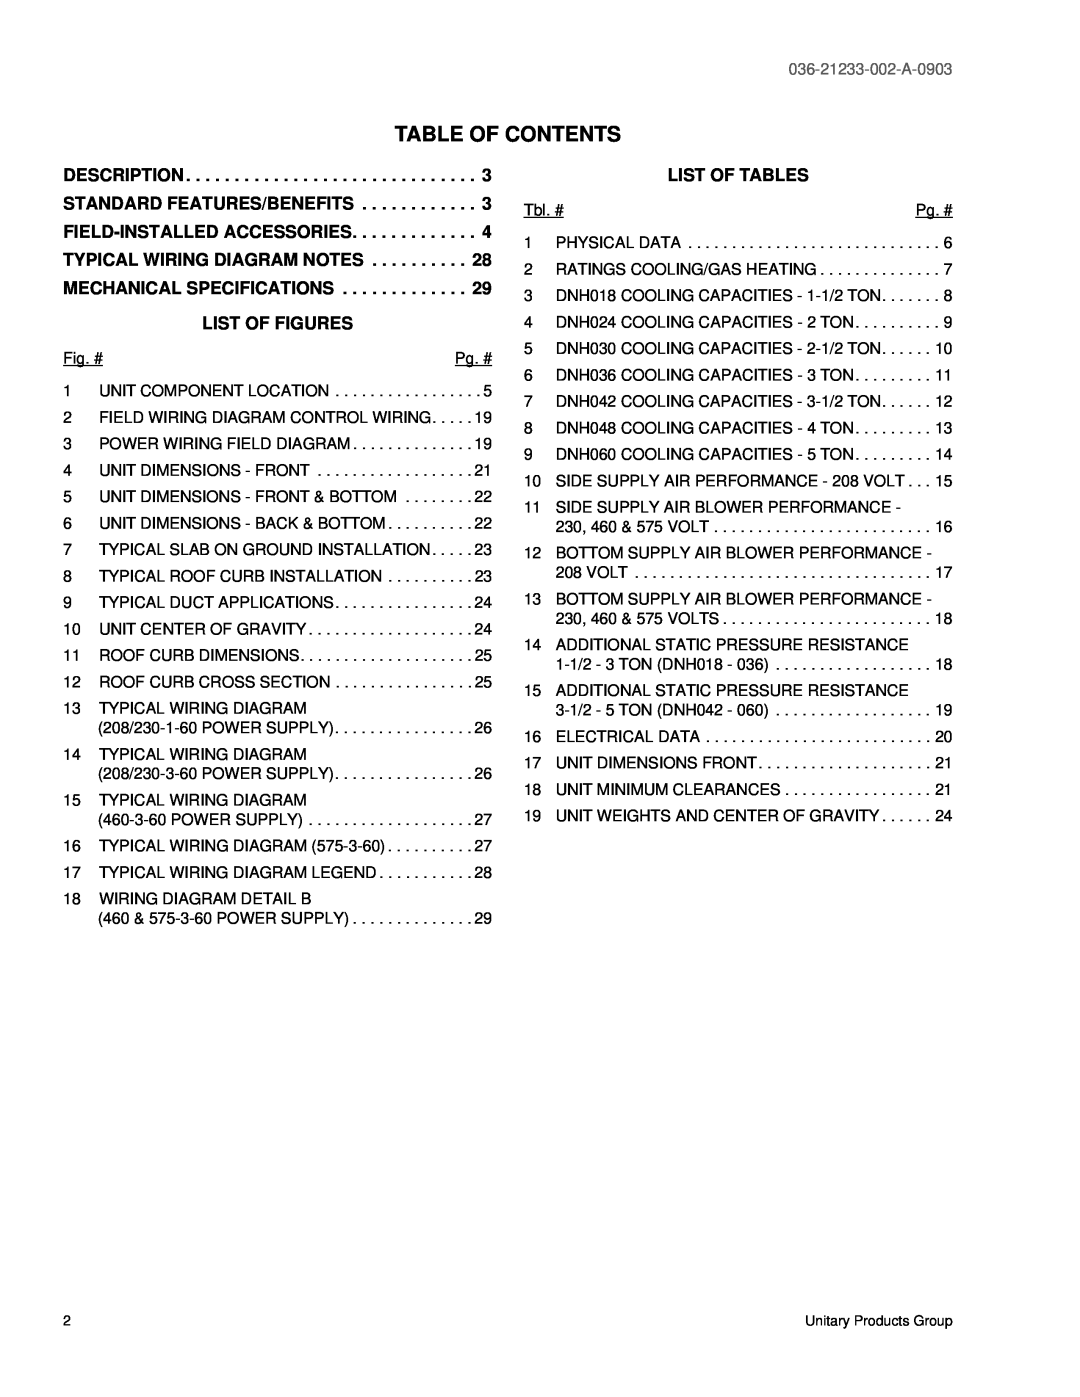 York DNH018 warranty Table Of Contents, List Of Figures, List Of Tables, 036-21233-002-A-0903 